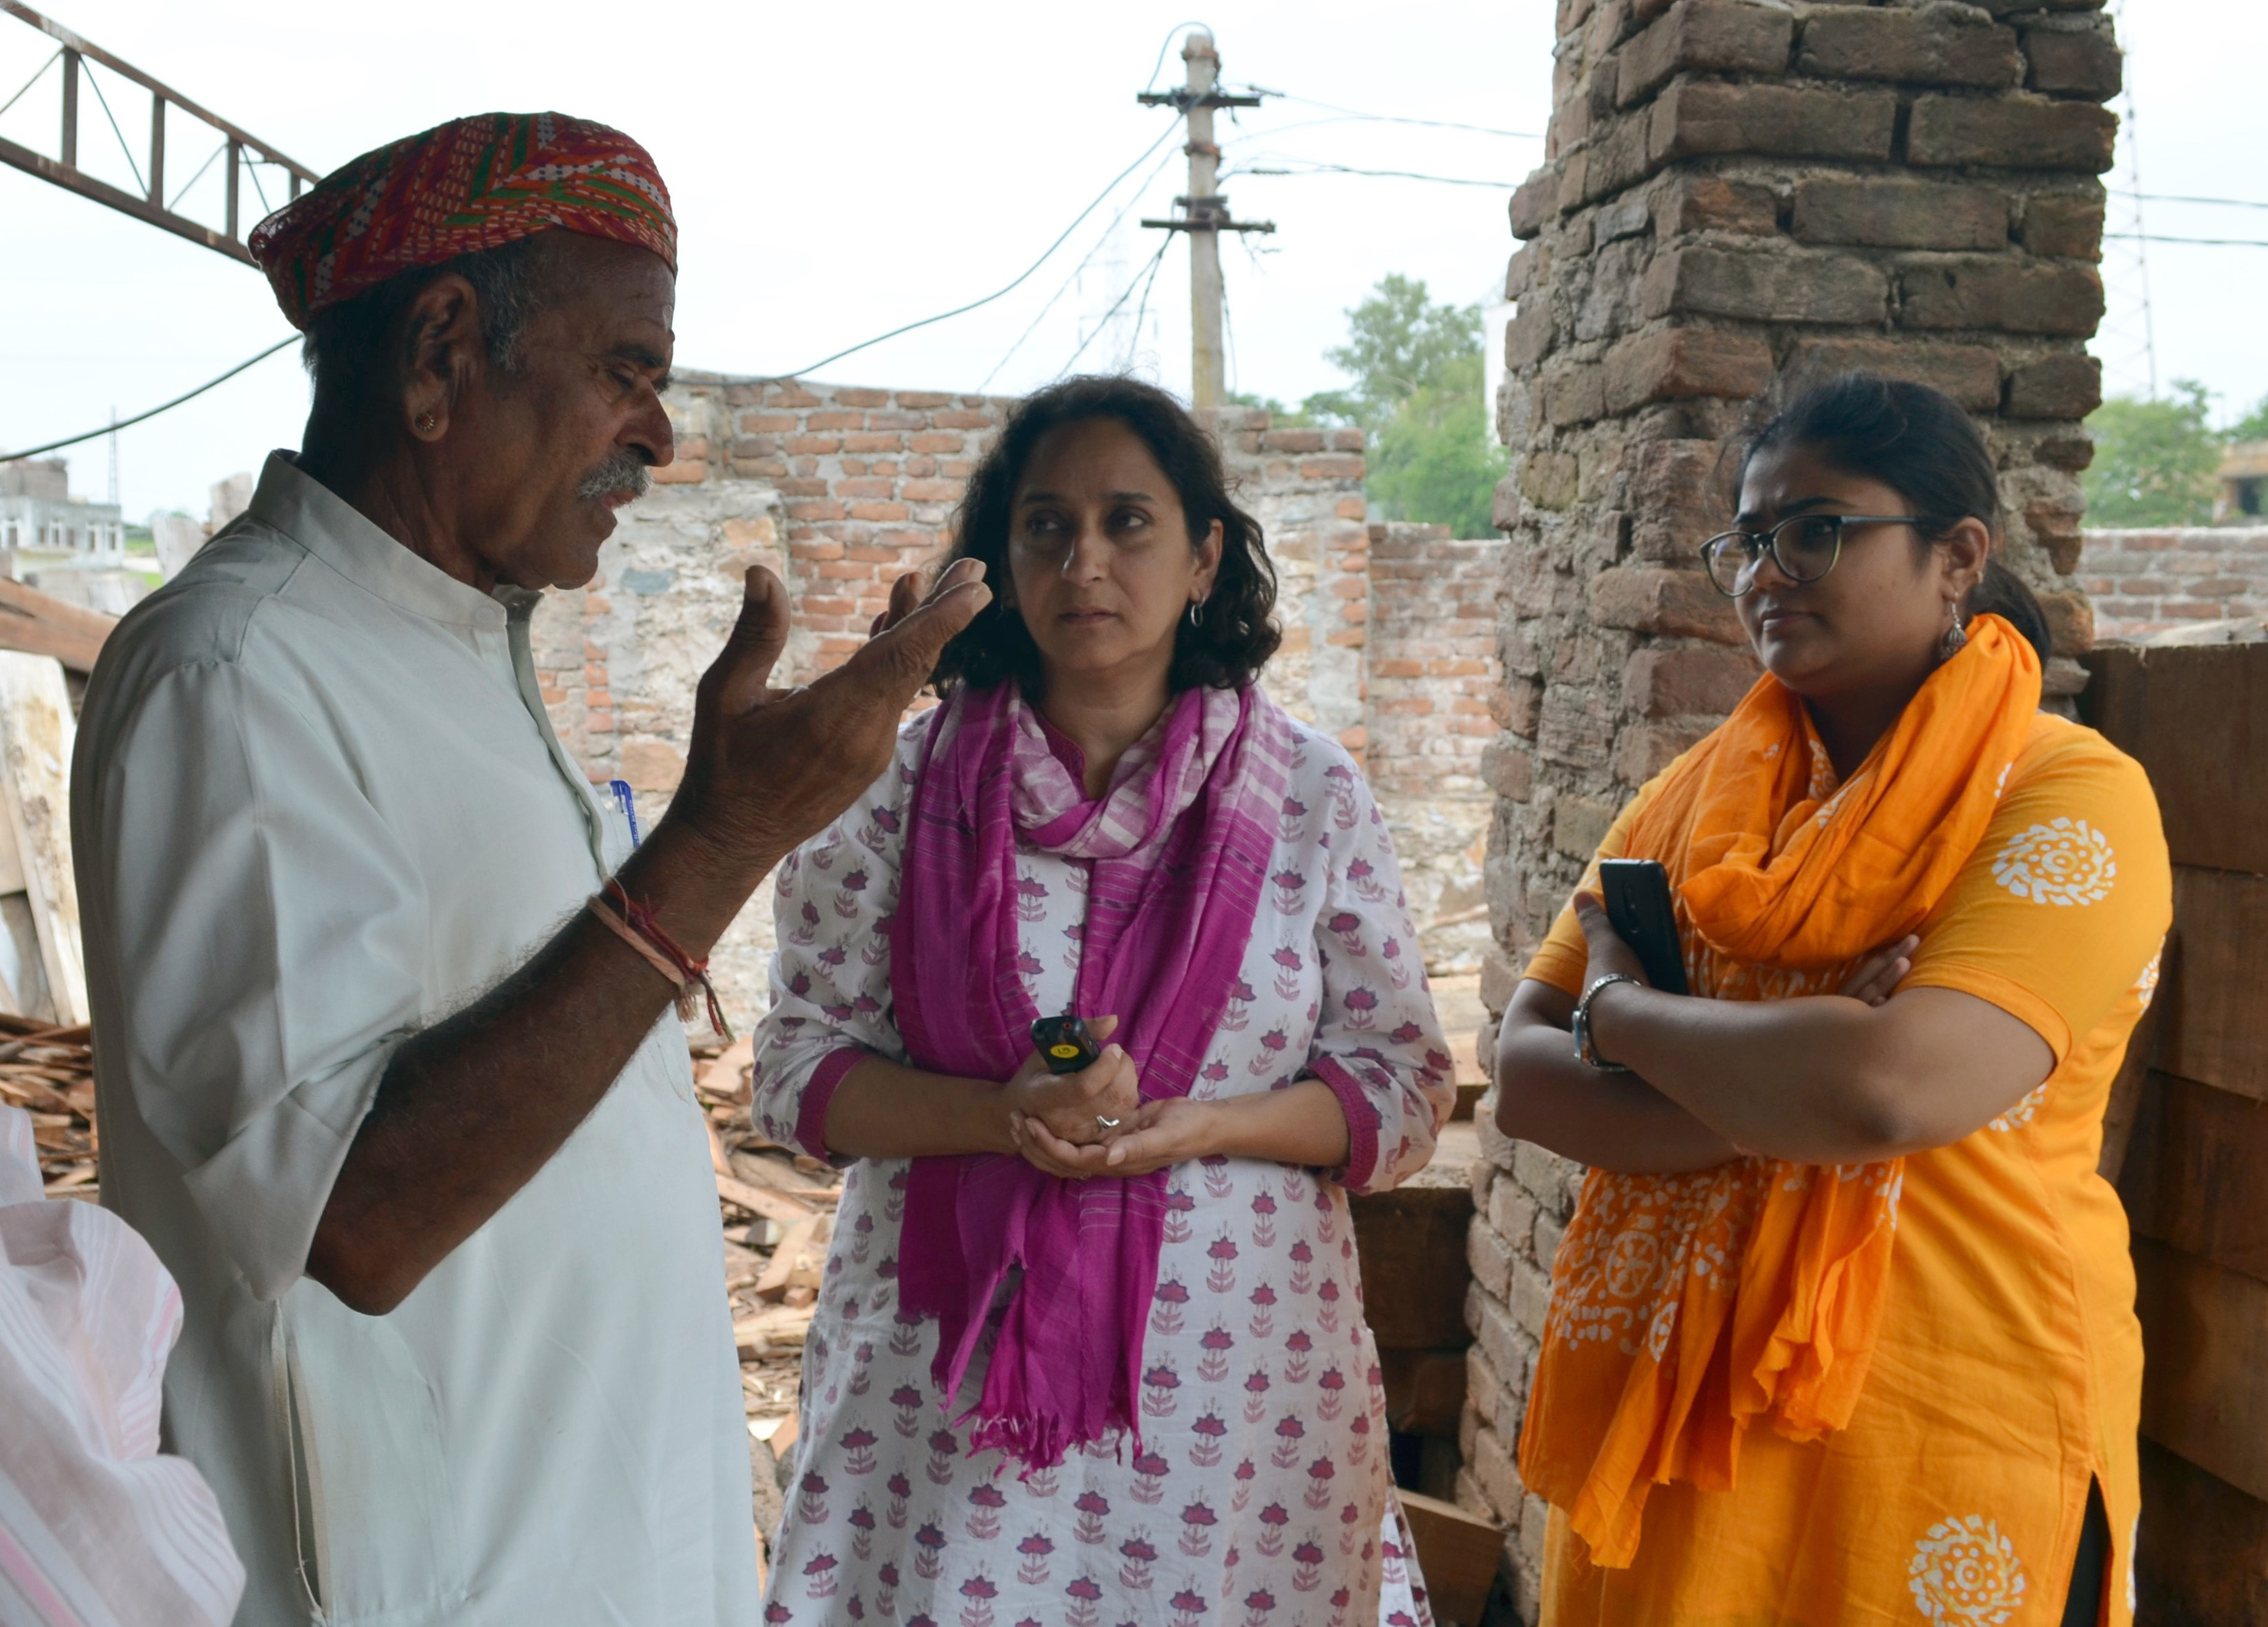 Meena Khandelwal (center) and Student intern Arnima Jain (right) talking with sawmill owner in Rajasthan, Summer 2019.